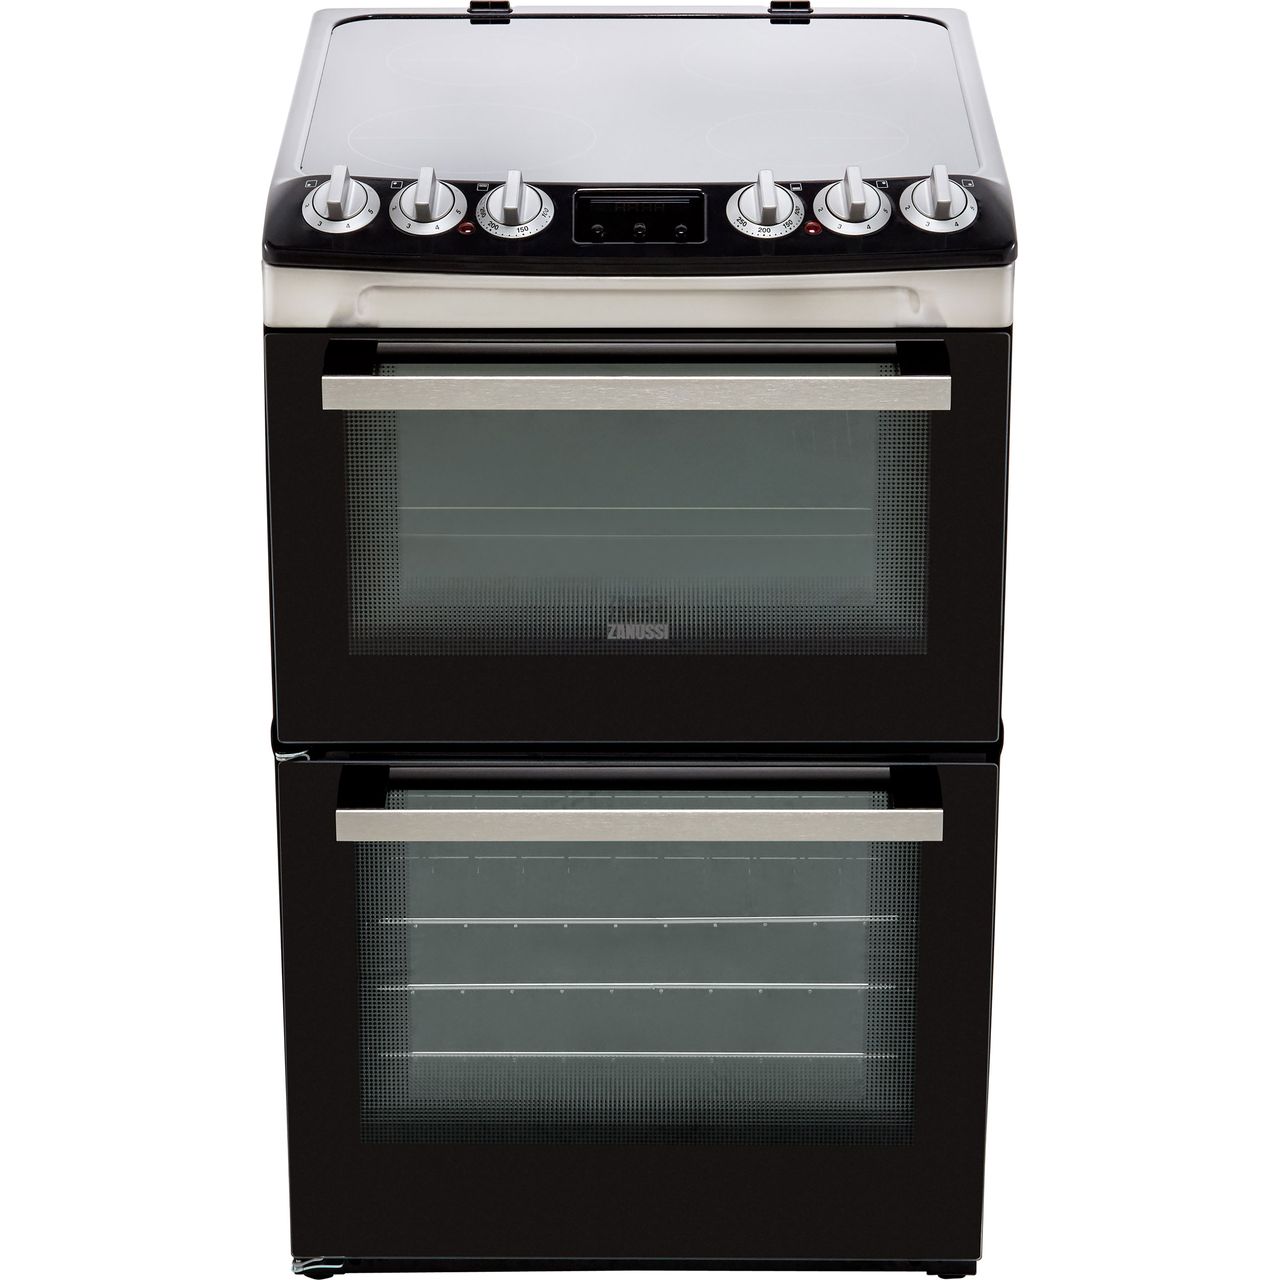 55cm double oven electric cooker